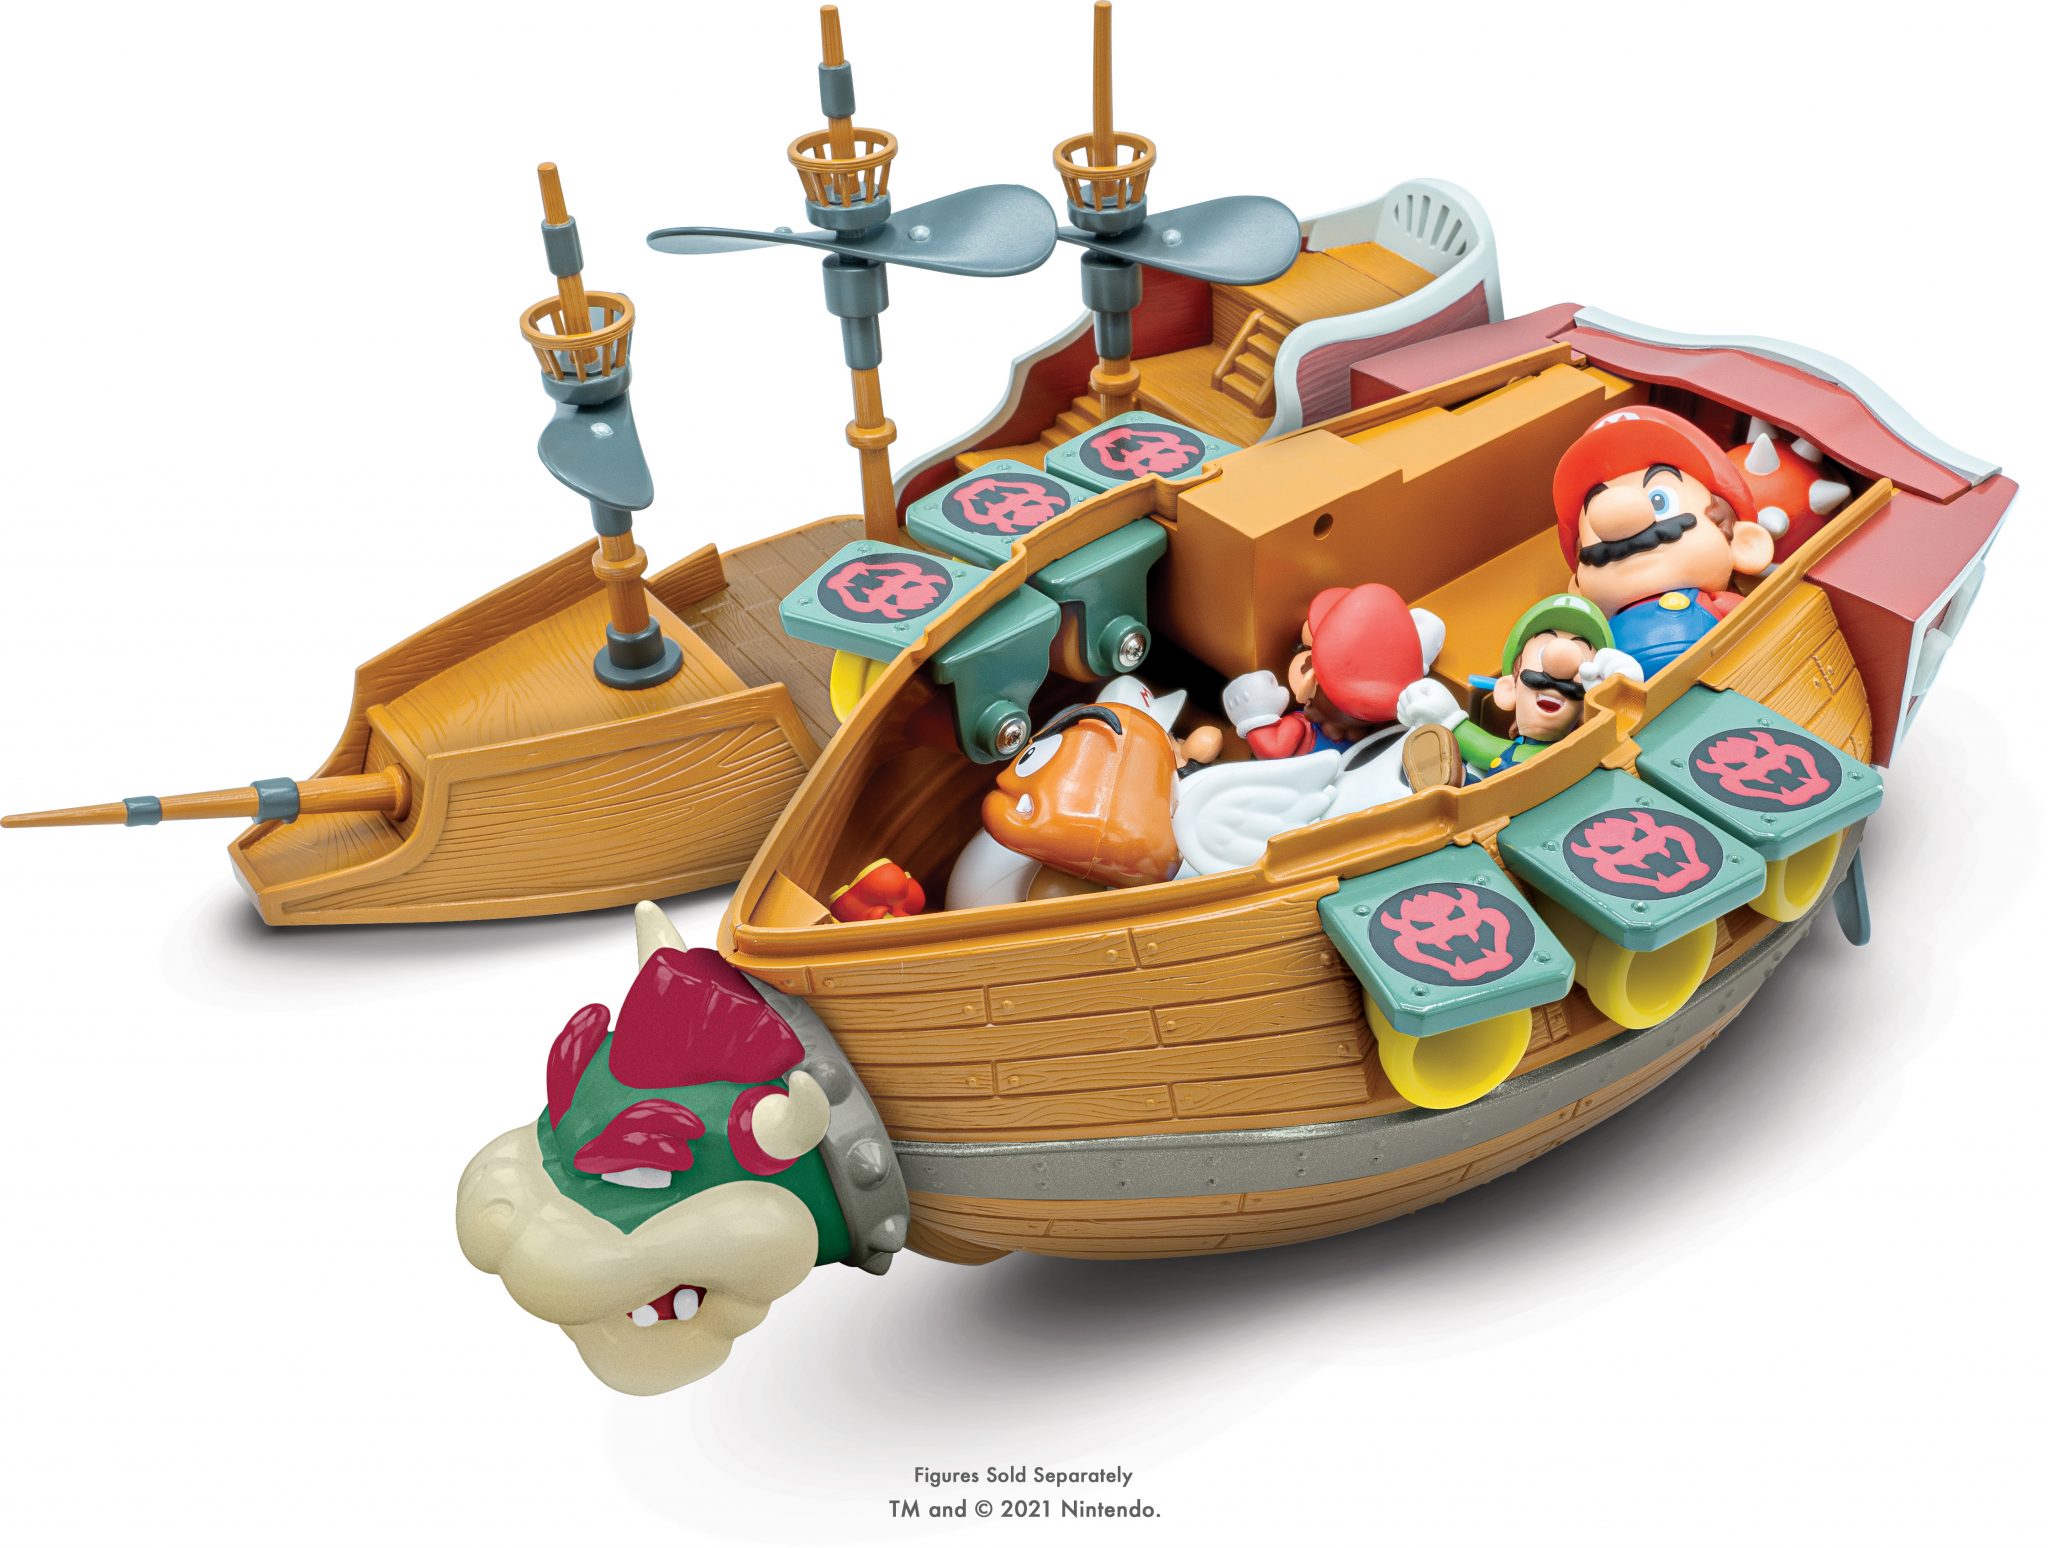 Jakks Pacific announces new Deluxe Bowser’s Airship Playset will invade